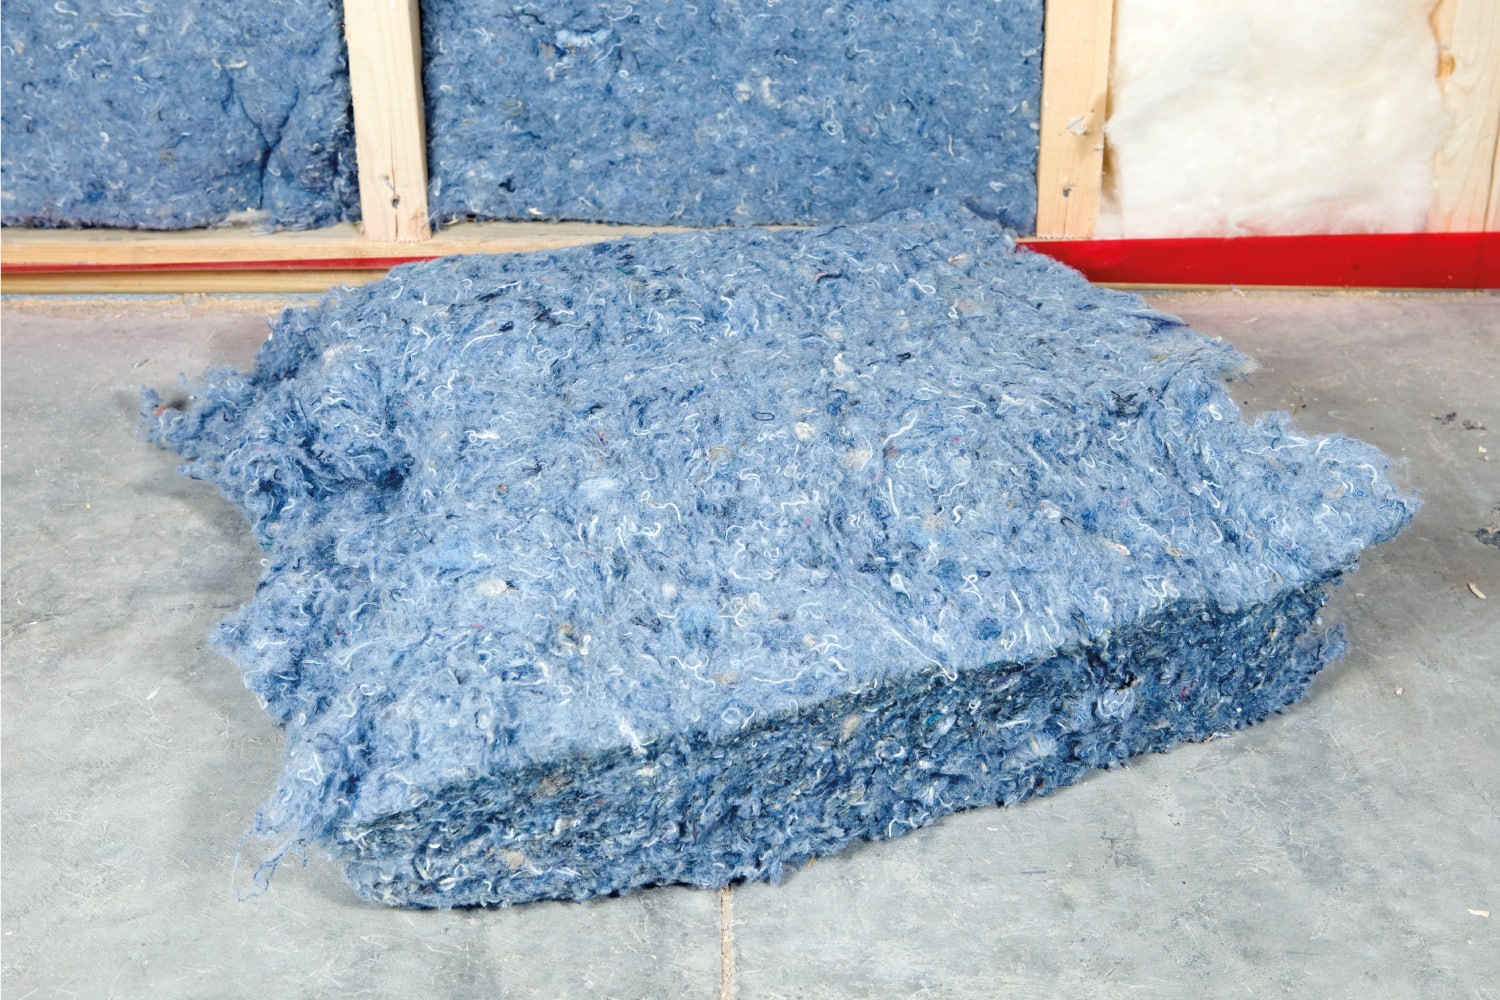 A small section of recycled blue jean denim insulation sits on a concrete floor near a stud wall frame